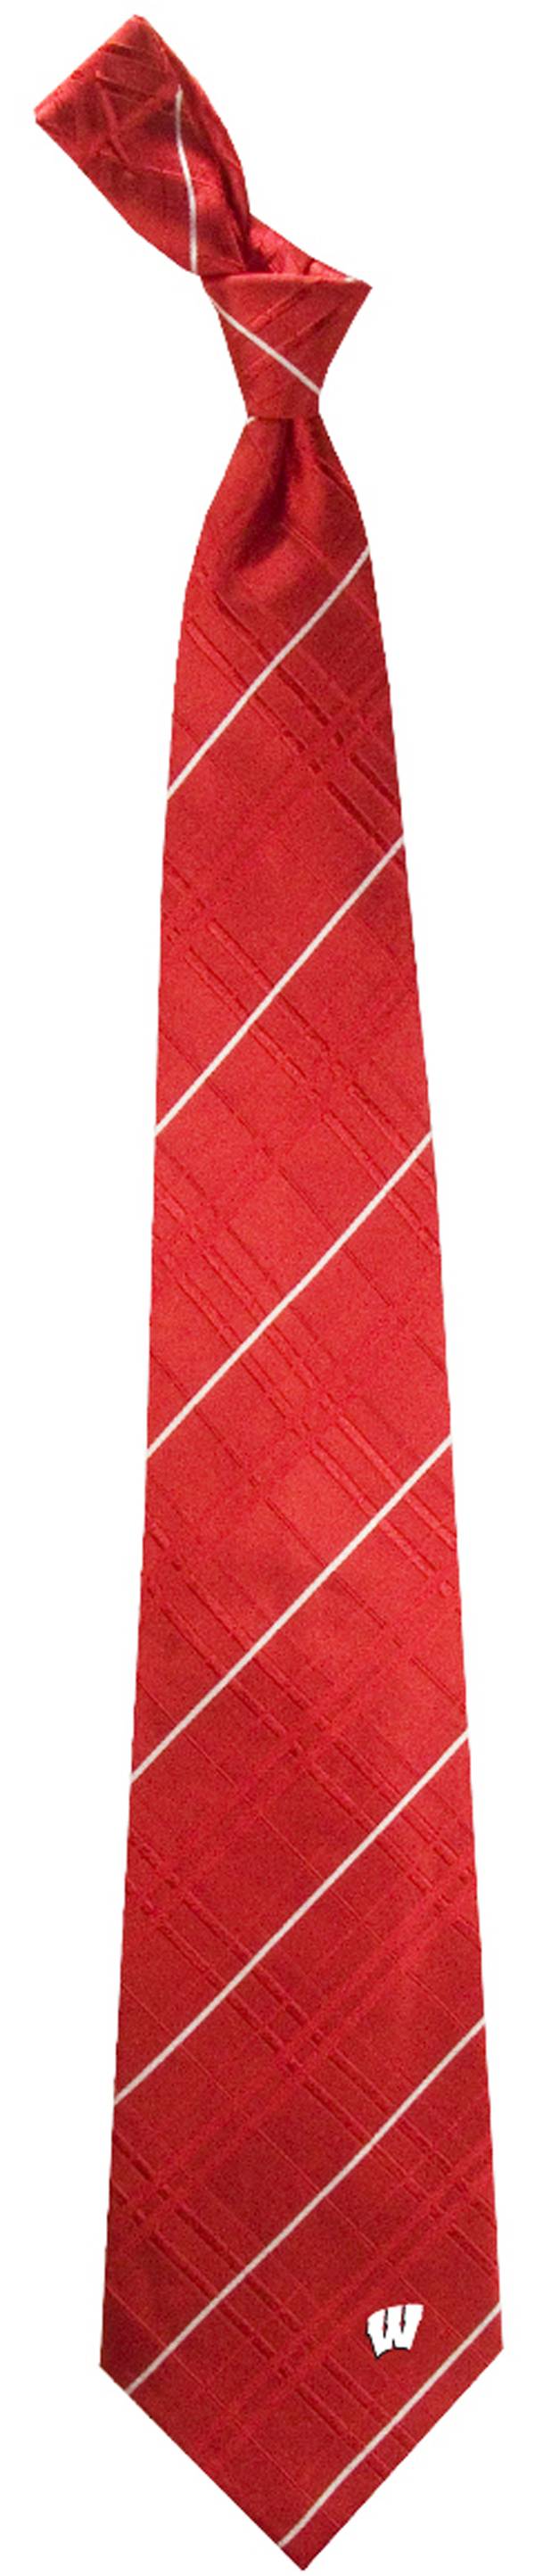 Eagles Wings Wisconsin Badgers Woven Oxford Necktie product image